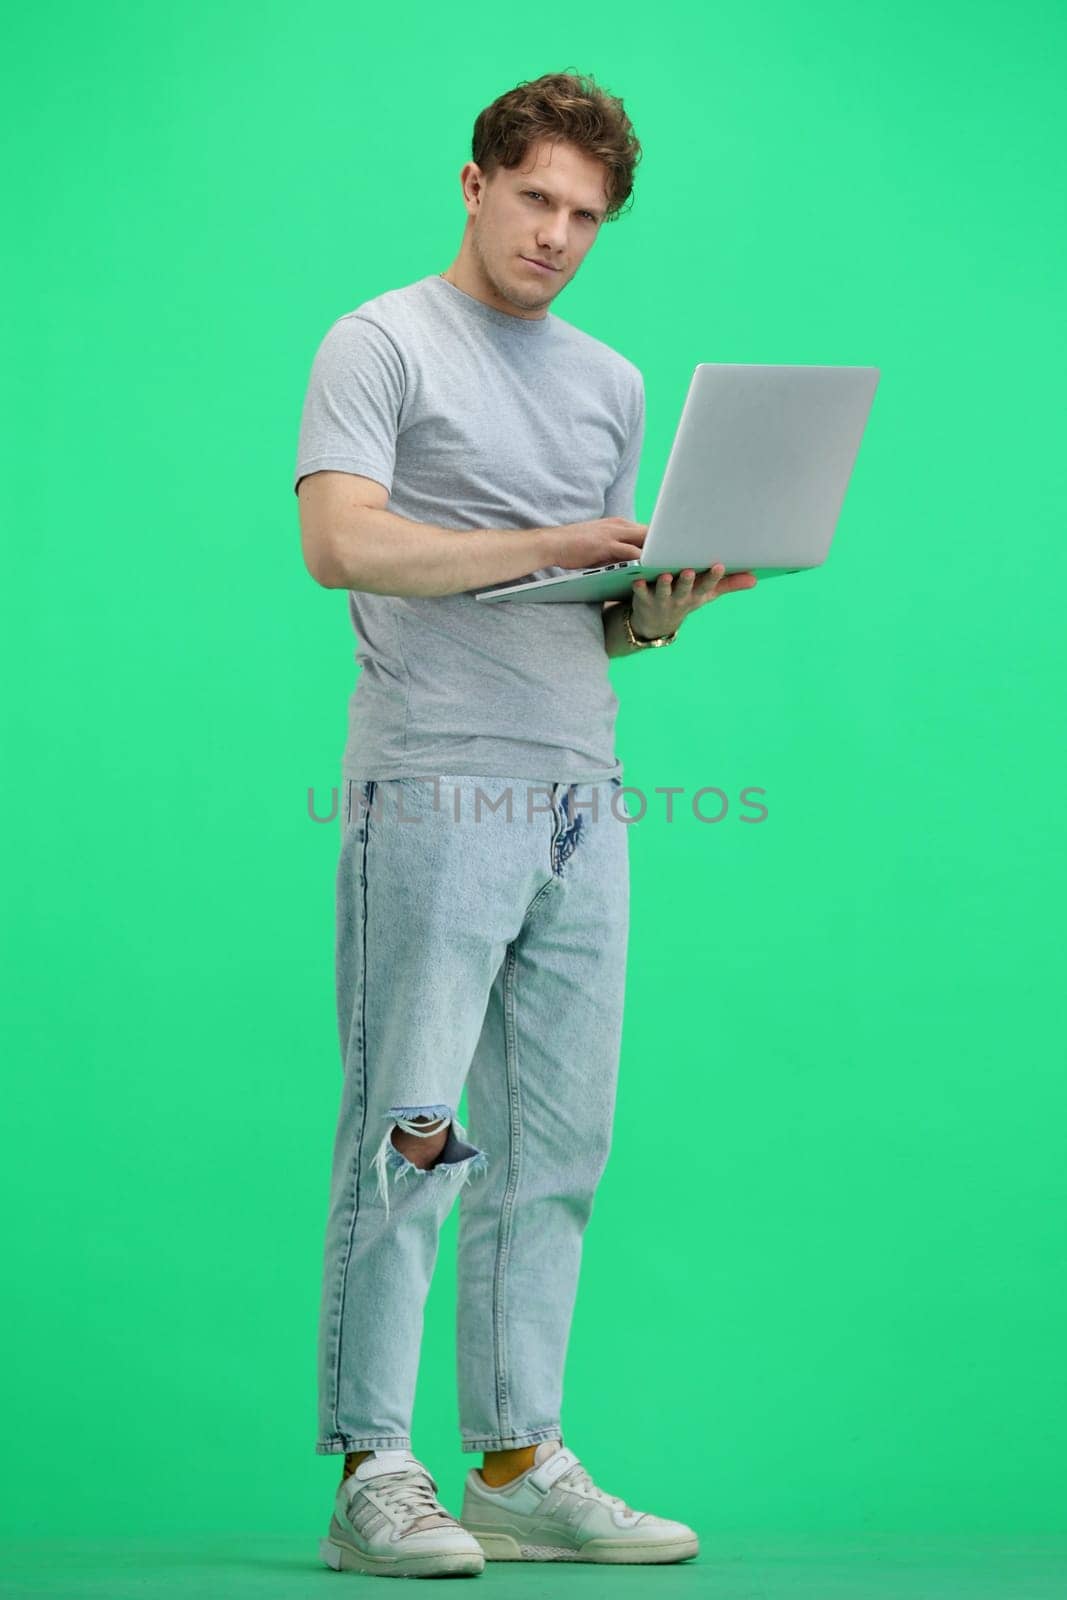 A man, full-length, on a green background, with a laptop.